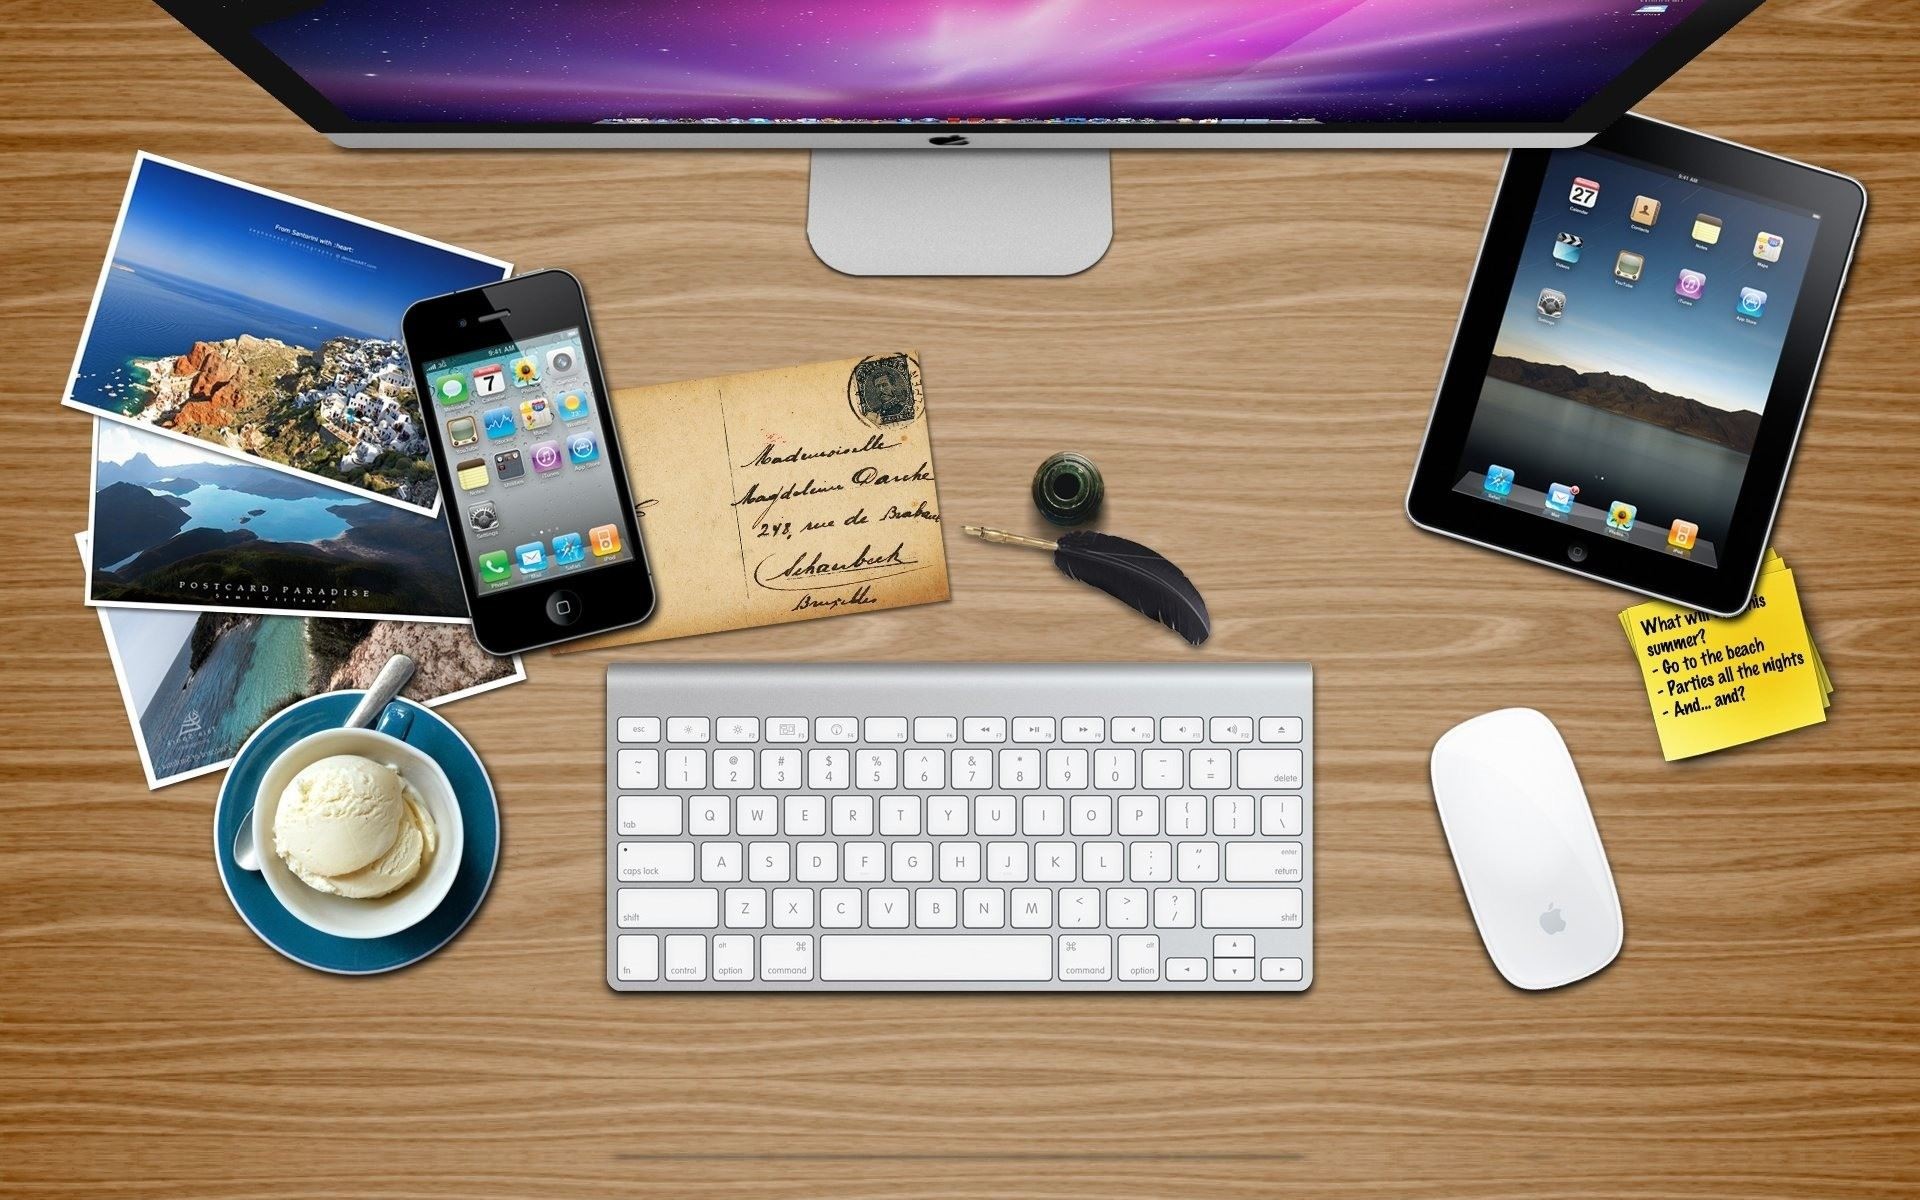 Apple devices on the table wallpaper download. Wallpaper, picture, photo